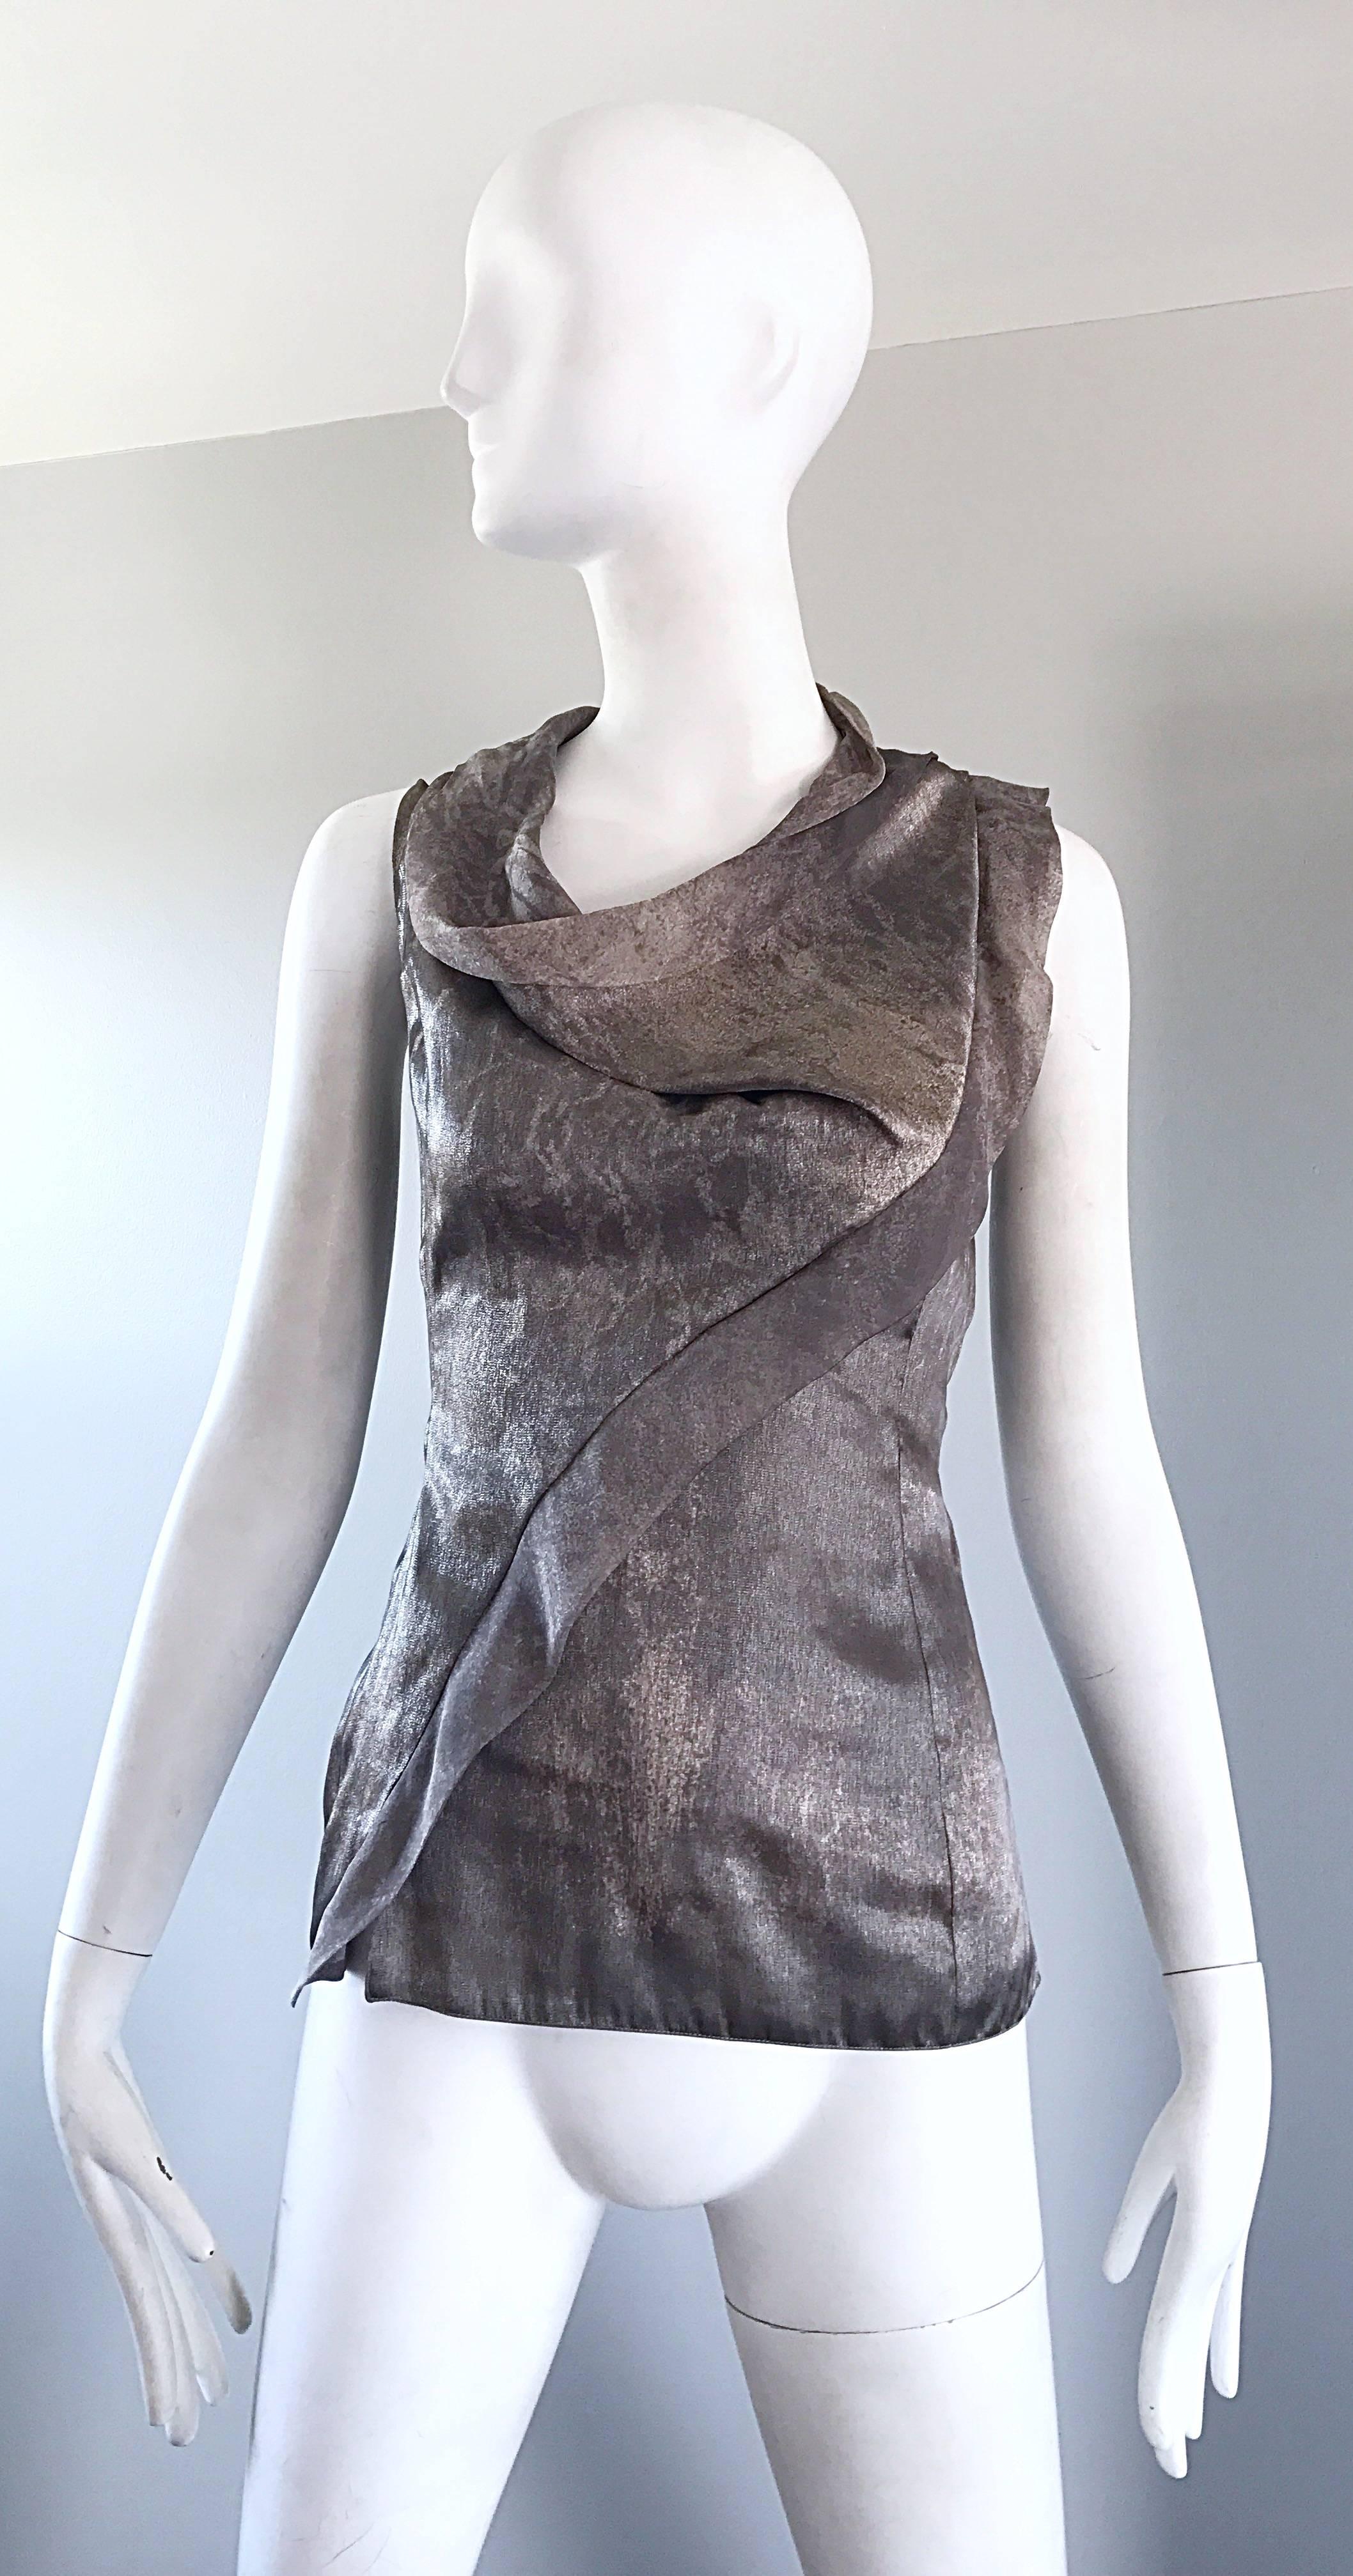 Beautiful vintage GIORGIO ARMANI 90s silver and gunmetal Avant Garde sleeveless shirt! Features luxurious silk, with an excellent draped neckline, and asymmetrical ruffle along the front bodice that drapes over the left shoulder. Hidden zipper up